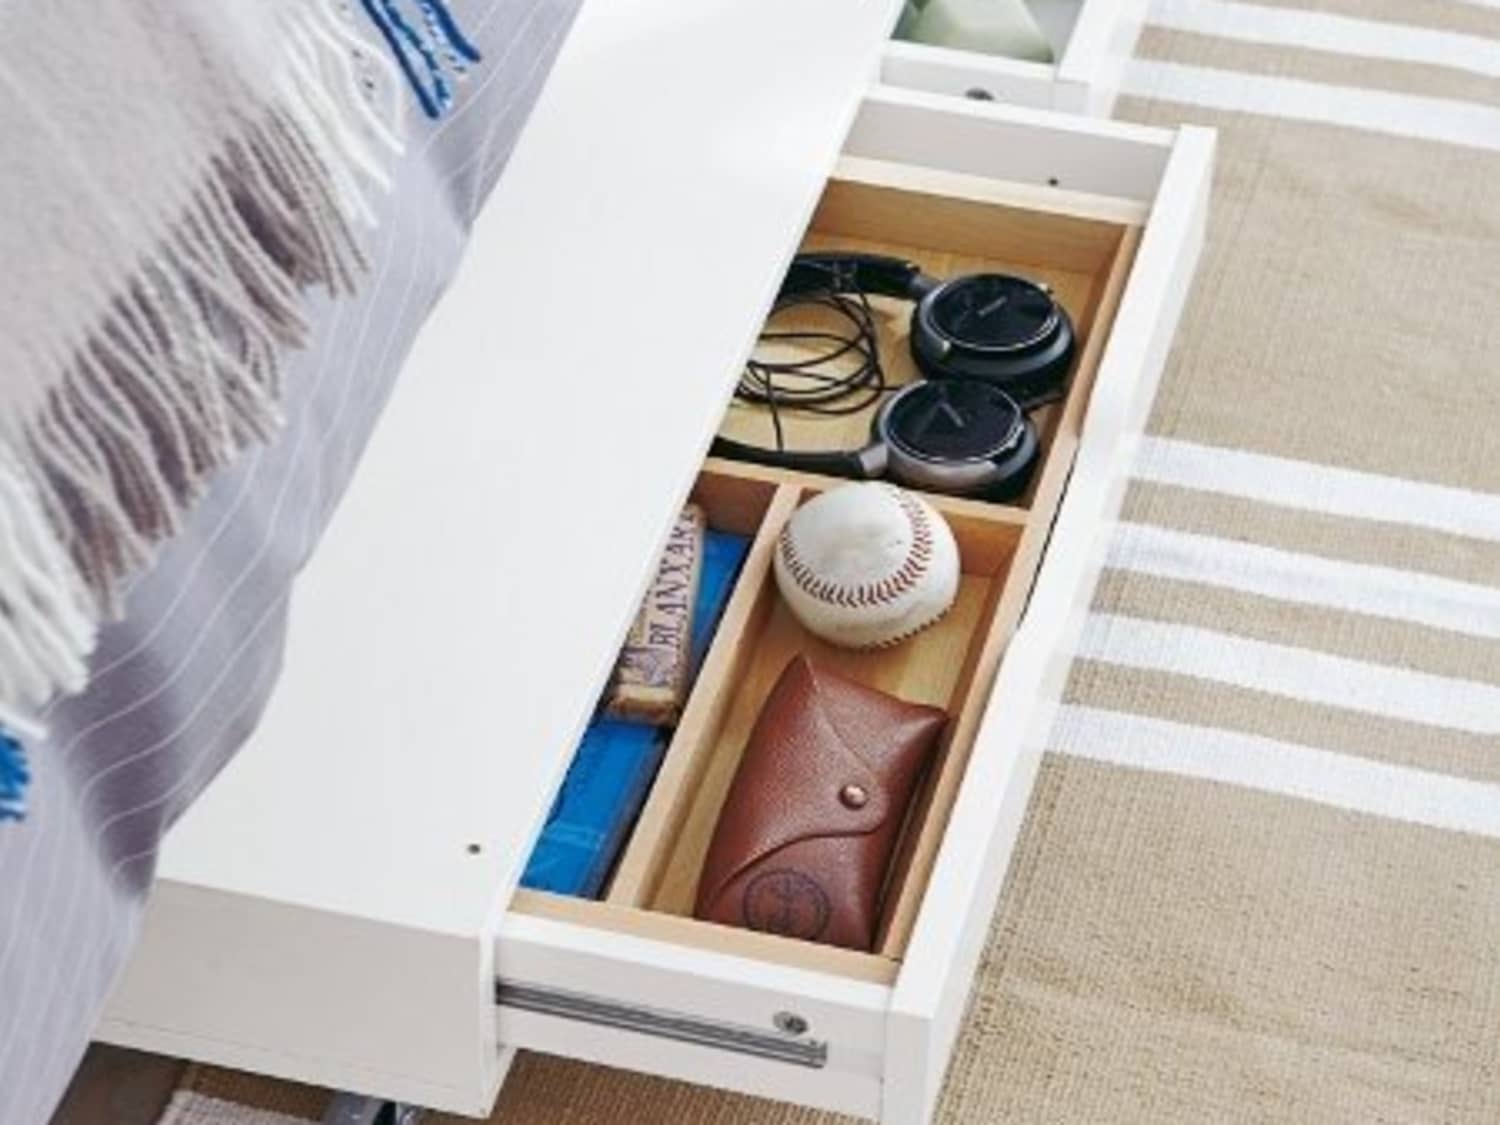 Here's how to organize a dorm room with hooks, bins and more - Reviewed